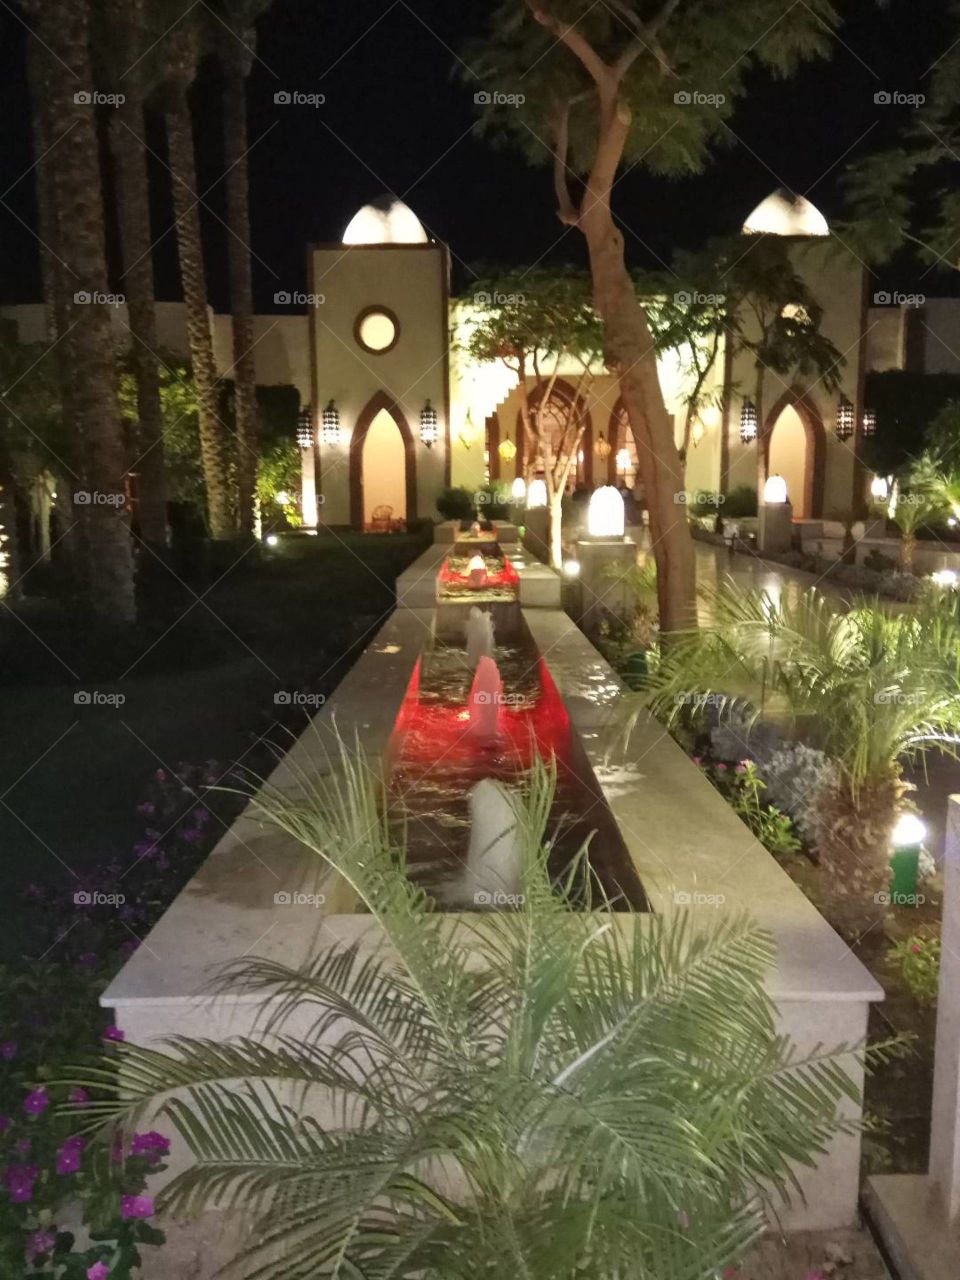 the territory of the Egyptian hotel evening light and fountains